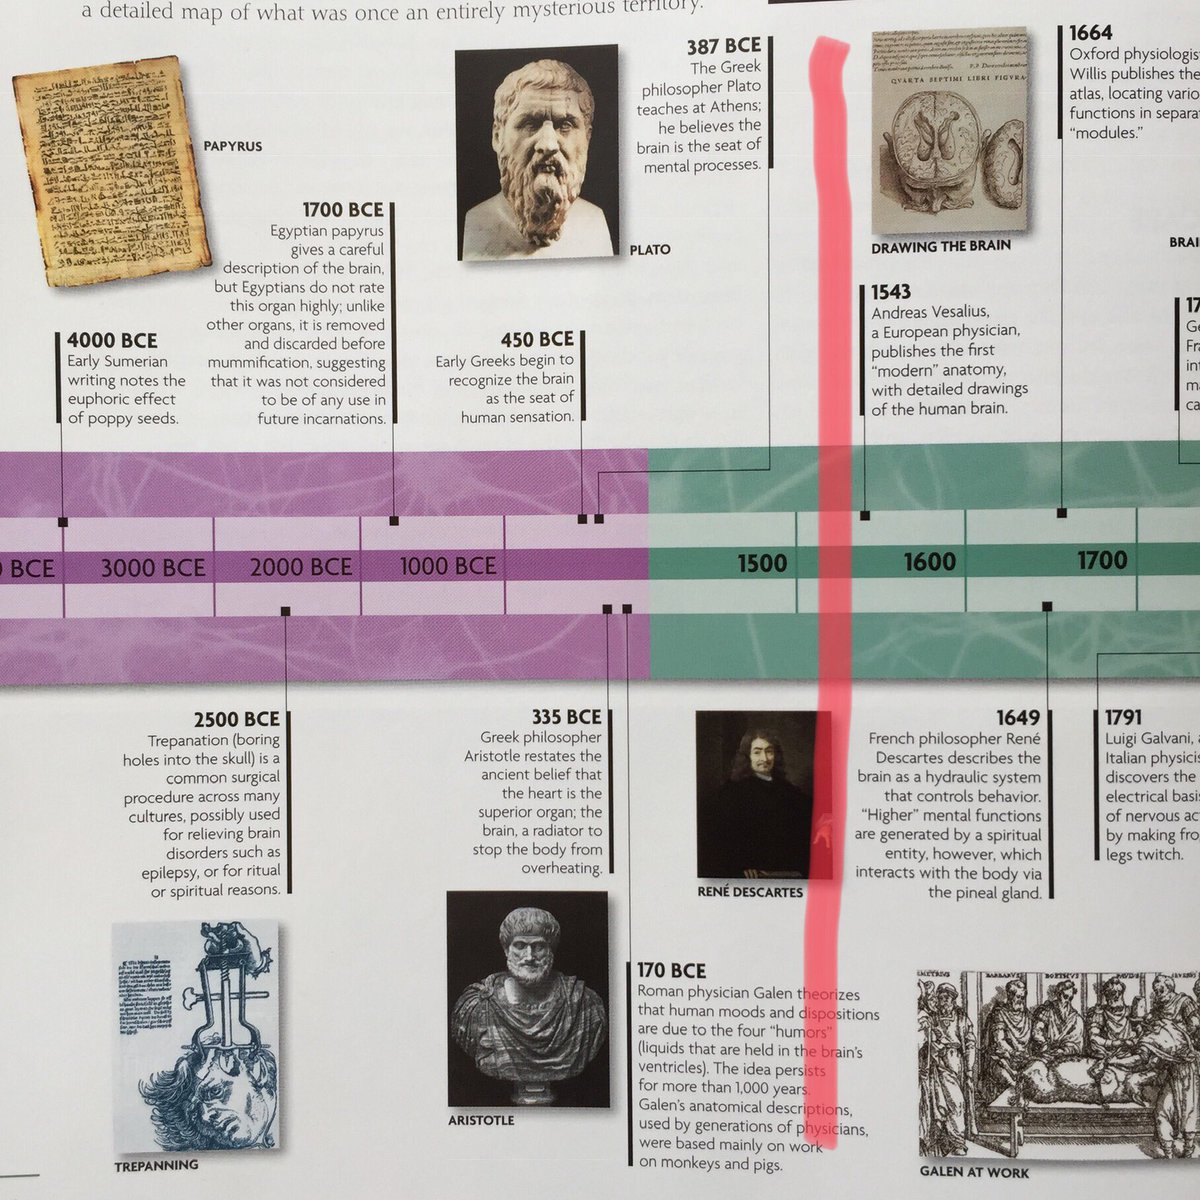 7/ Brain History.Note the gap of several centuries that separates glimpses of light and darkness.Be careful what you learn from history.The wisest humans of 1500 knew less than high school graduates today, simply because we’re standing on the shoulders of giants.